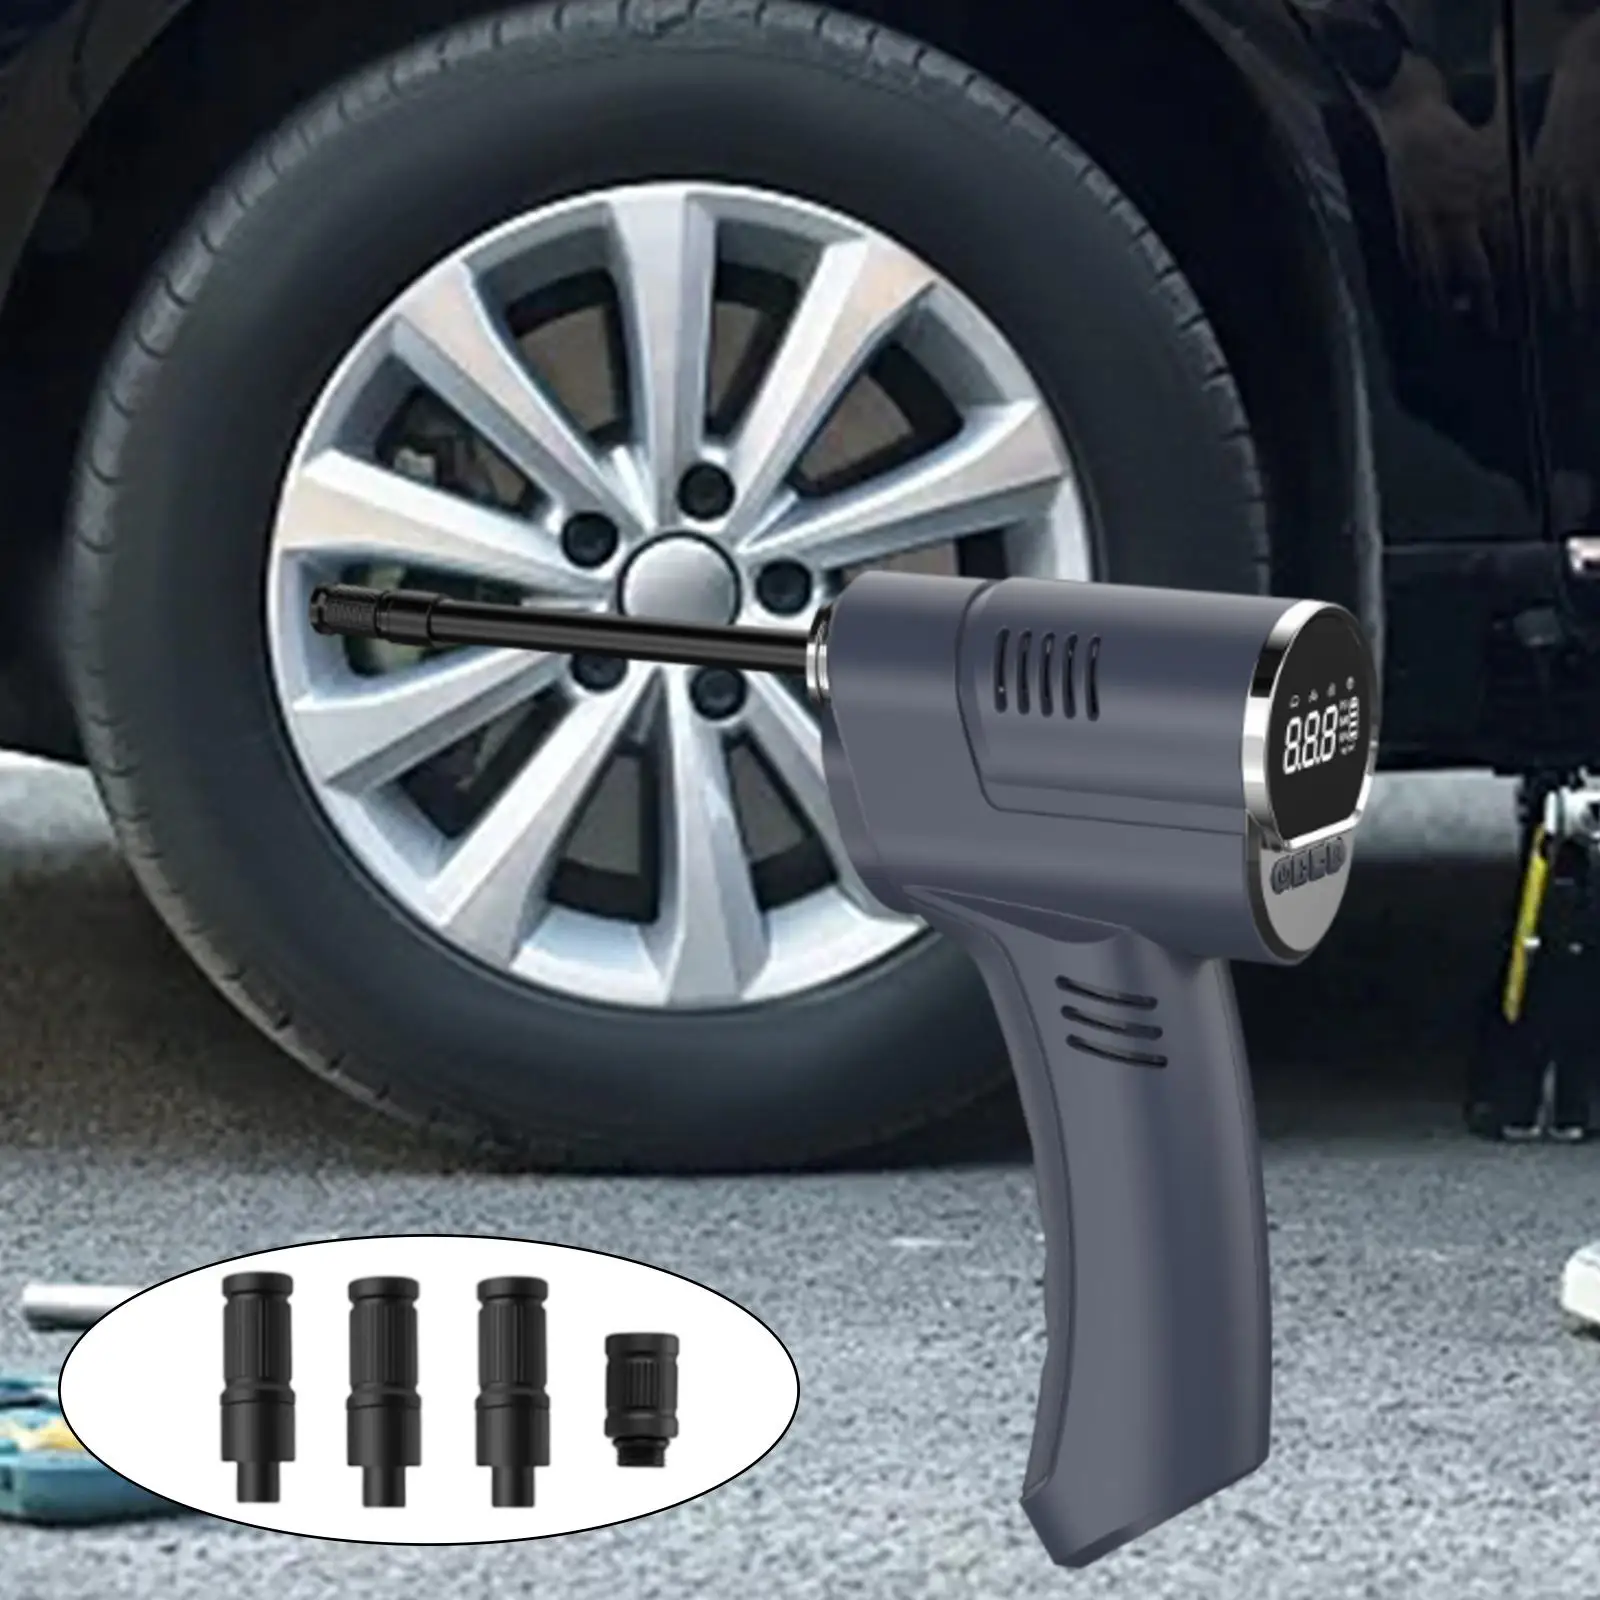 Portable Tyre Inflator Air Compressor Multifunctional for Motorcycles Bicycles Balls Lightweight USB Charging Rechargeable